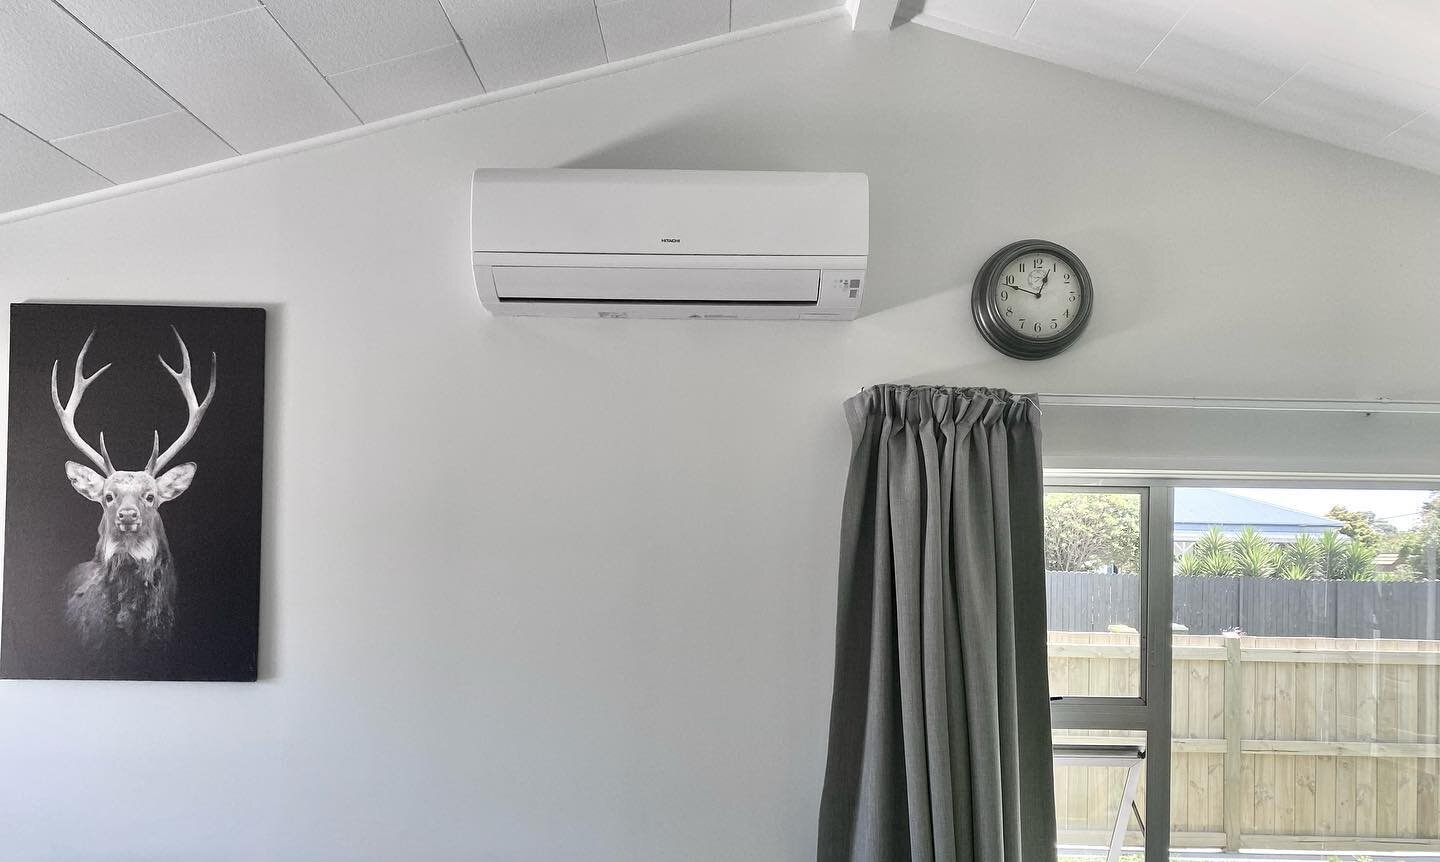 How tidy does this new Hitachi heat pump look? High wall heat pumps are a great heating/cooling option to optimise the space in your home! #hitachi #heatpump